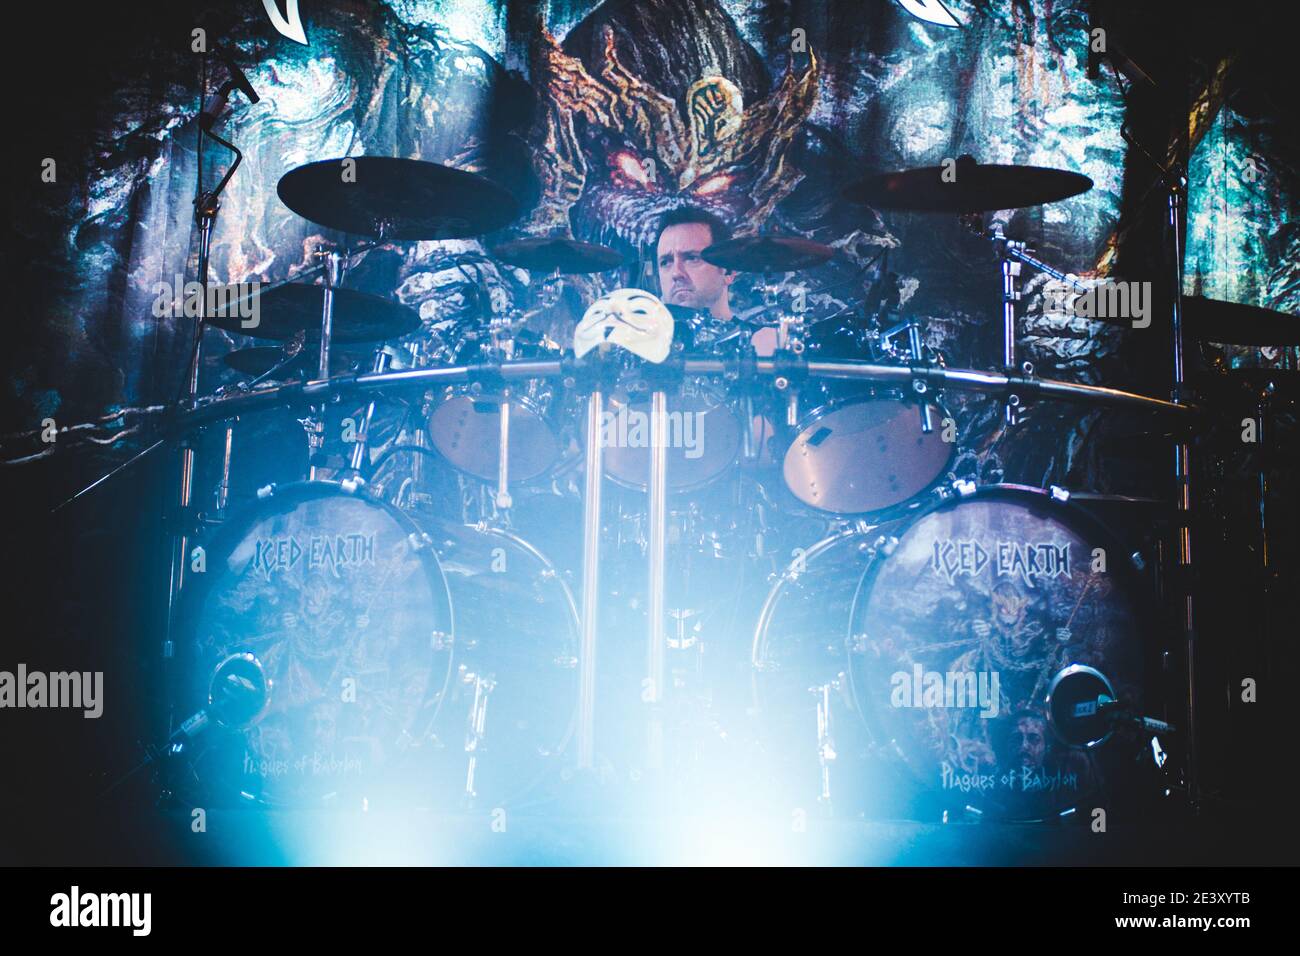 ITALY, ROMAGNANO SESIA, 2014: John Dette, drummer of the  American heavy metal band Iced Earth, performing live on stage at the Rock N Roll Arena Stock Photo